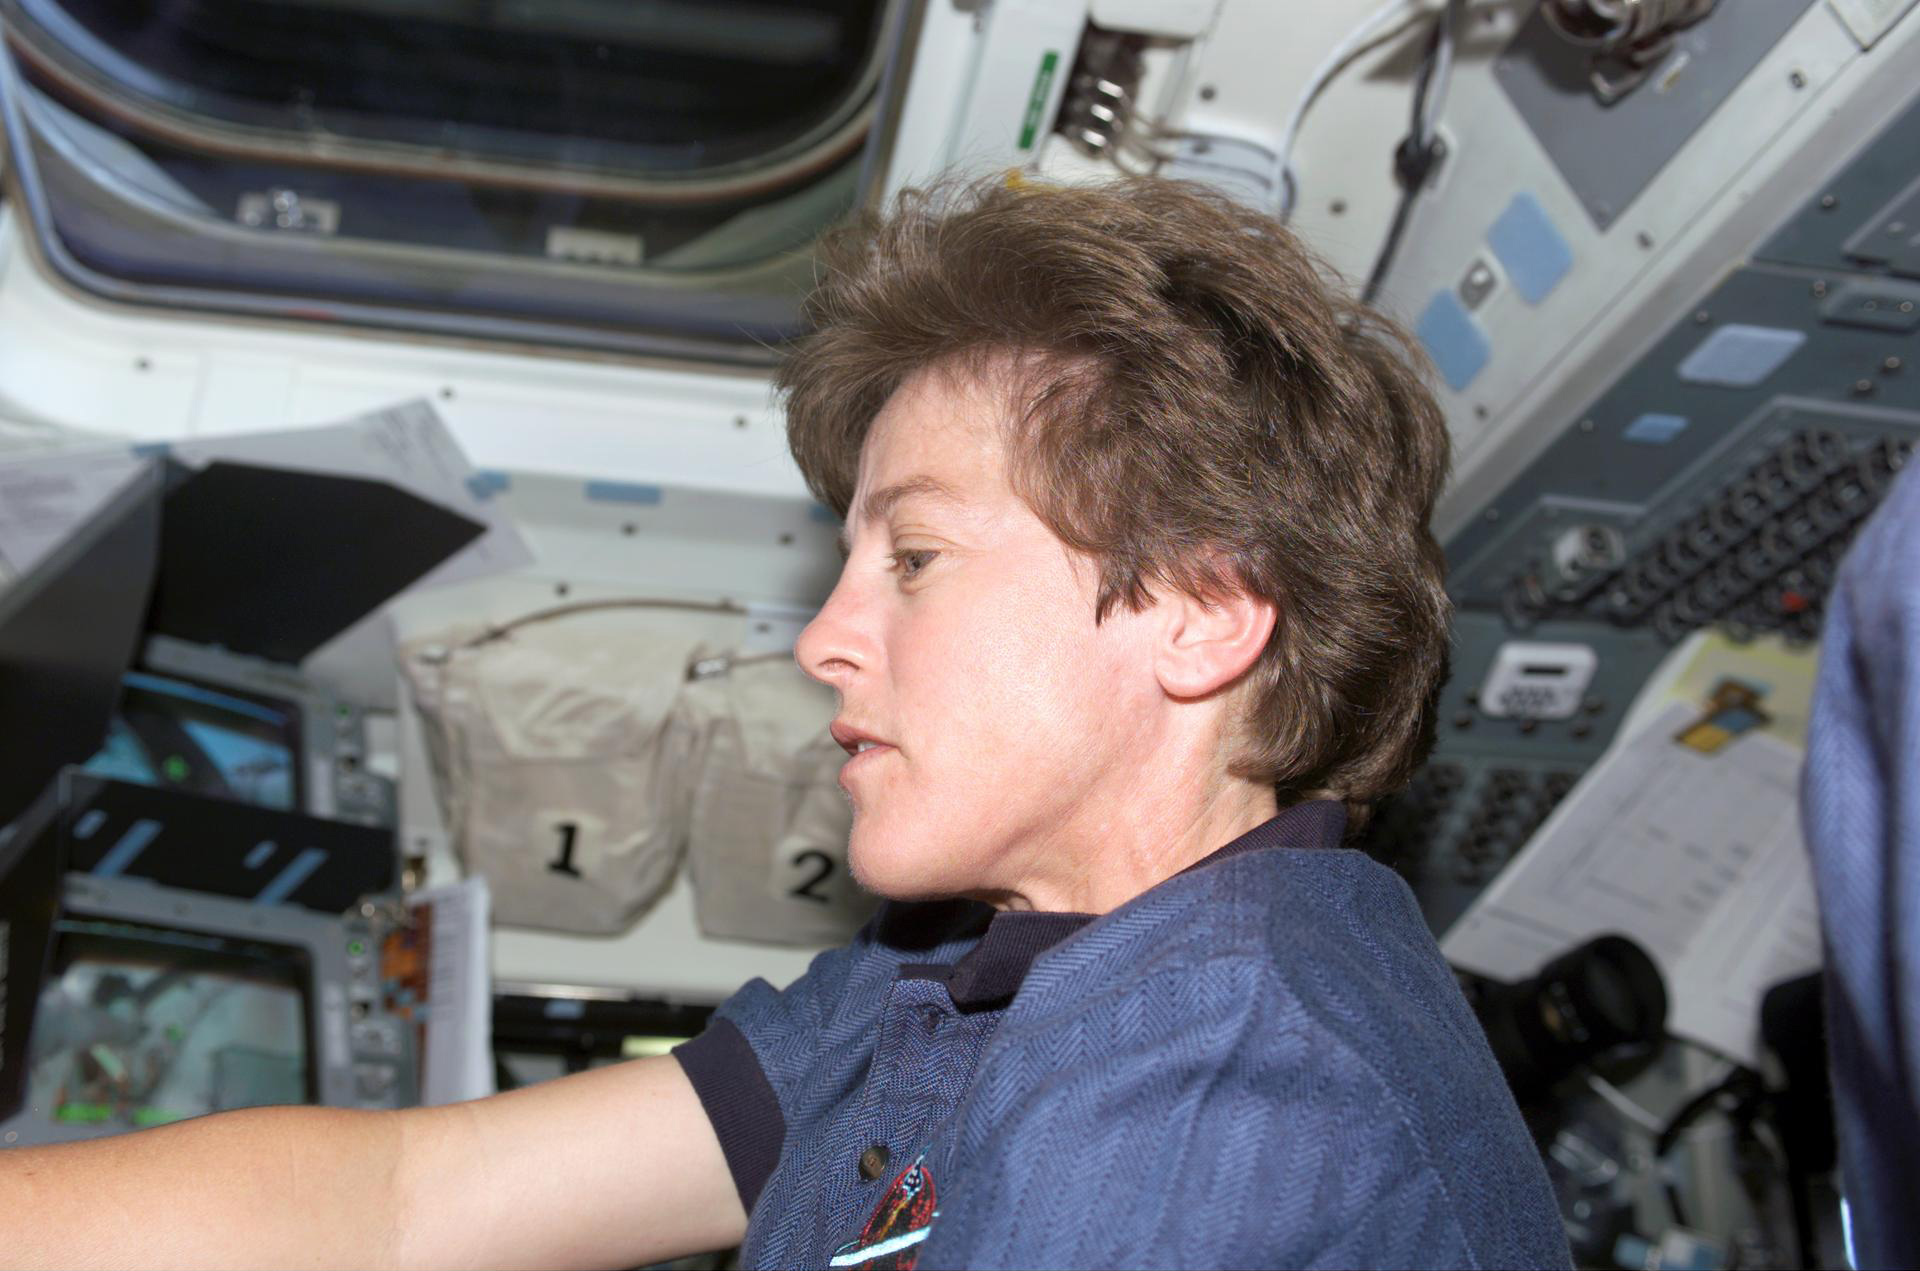 Shuttle astronaut Wendy Lawrence talks spacesuits, Mir and studying Russian in ‘Virtual Astronaut’ webcast Friday